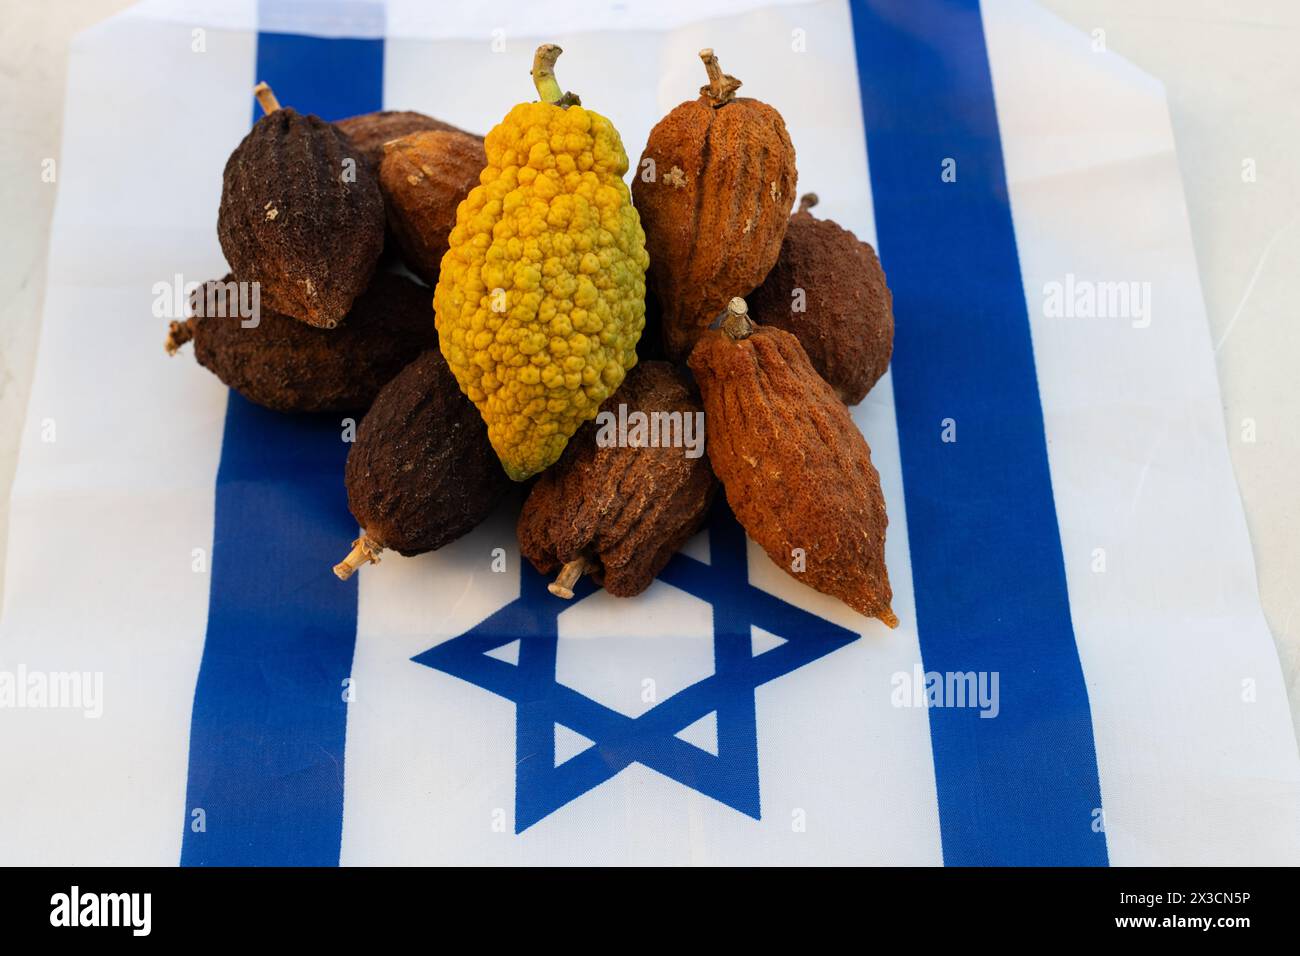 Still life image of a mature, yellow, highly textured, kosher etrog alongside similar brown, dried fruits from previous years,  in a pile on top of an Stock Photo